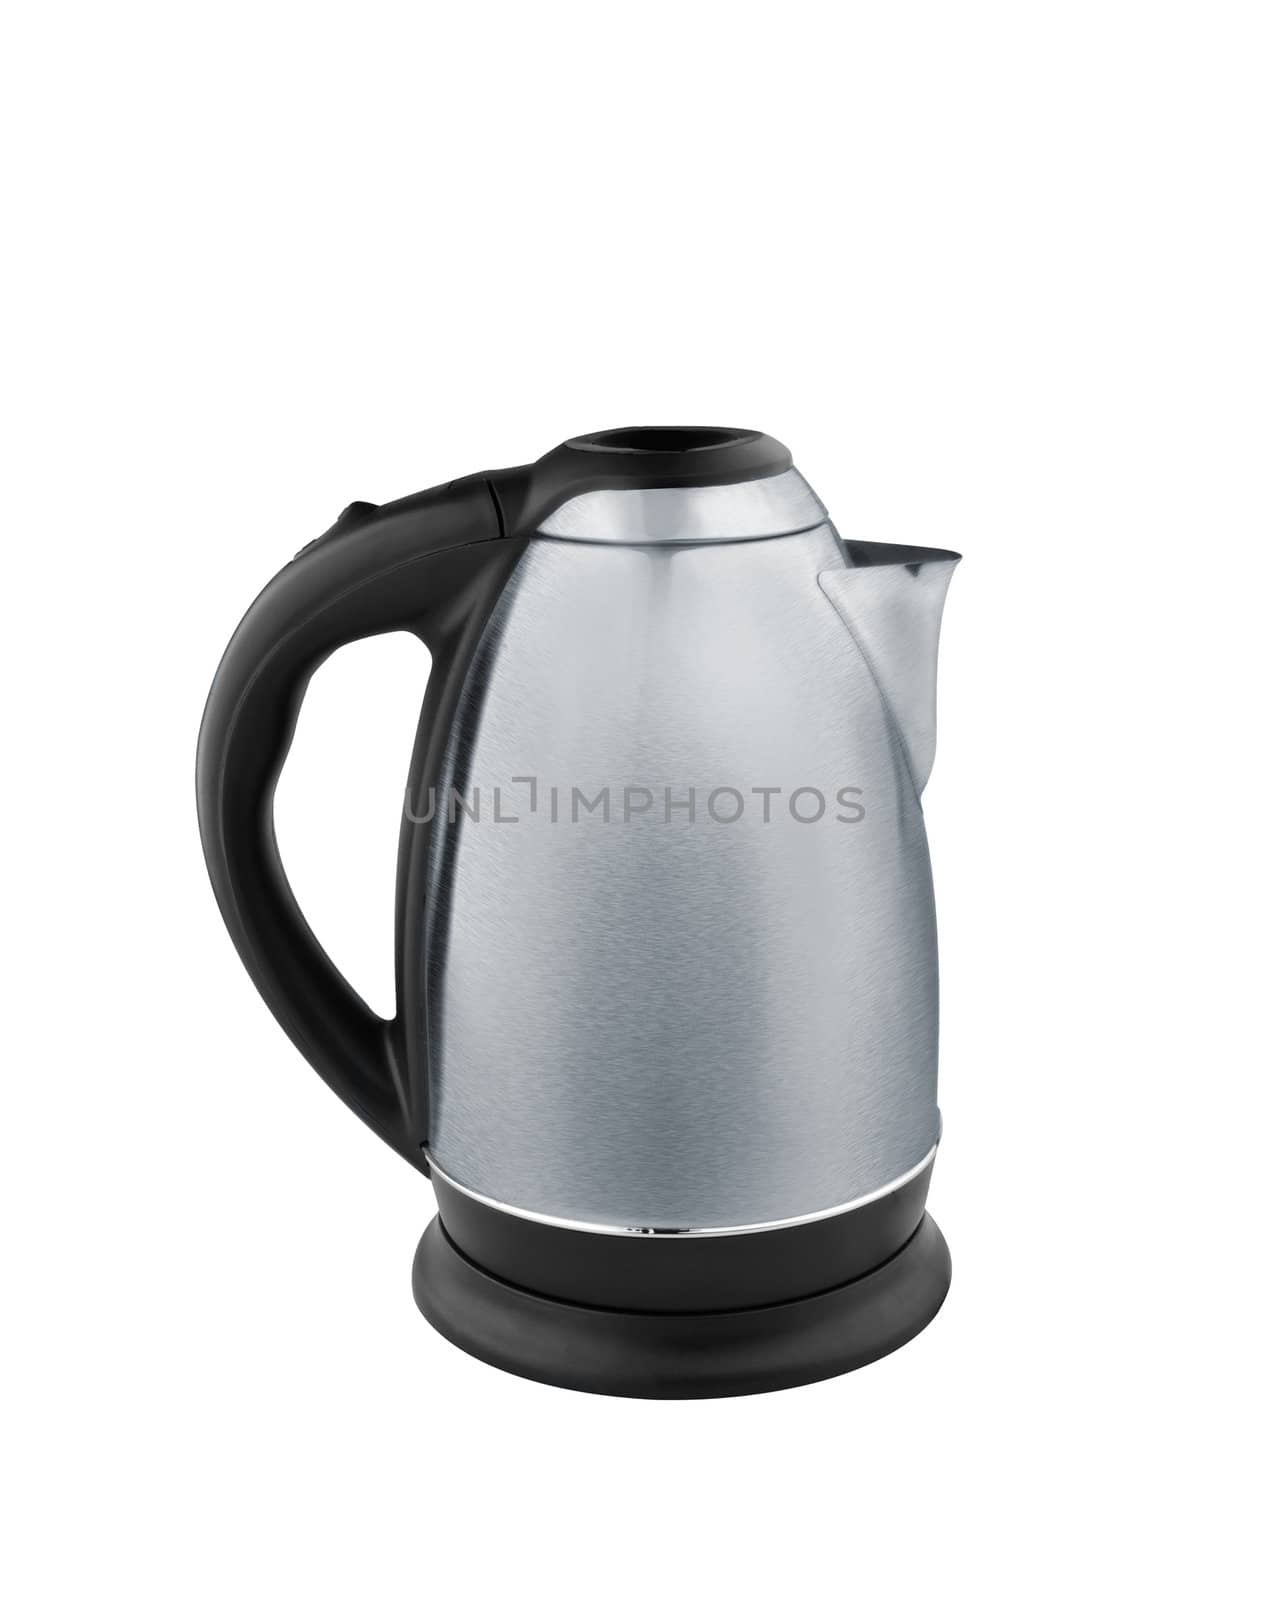 Stainless steel electric kettle isolated on white background by shutswis